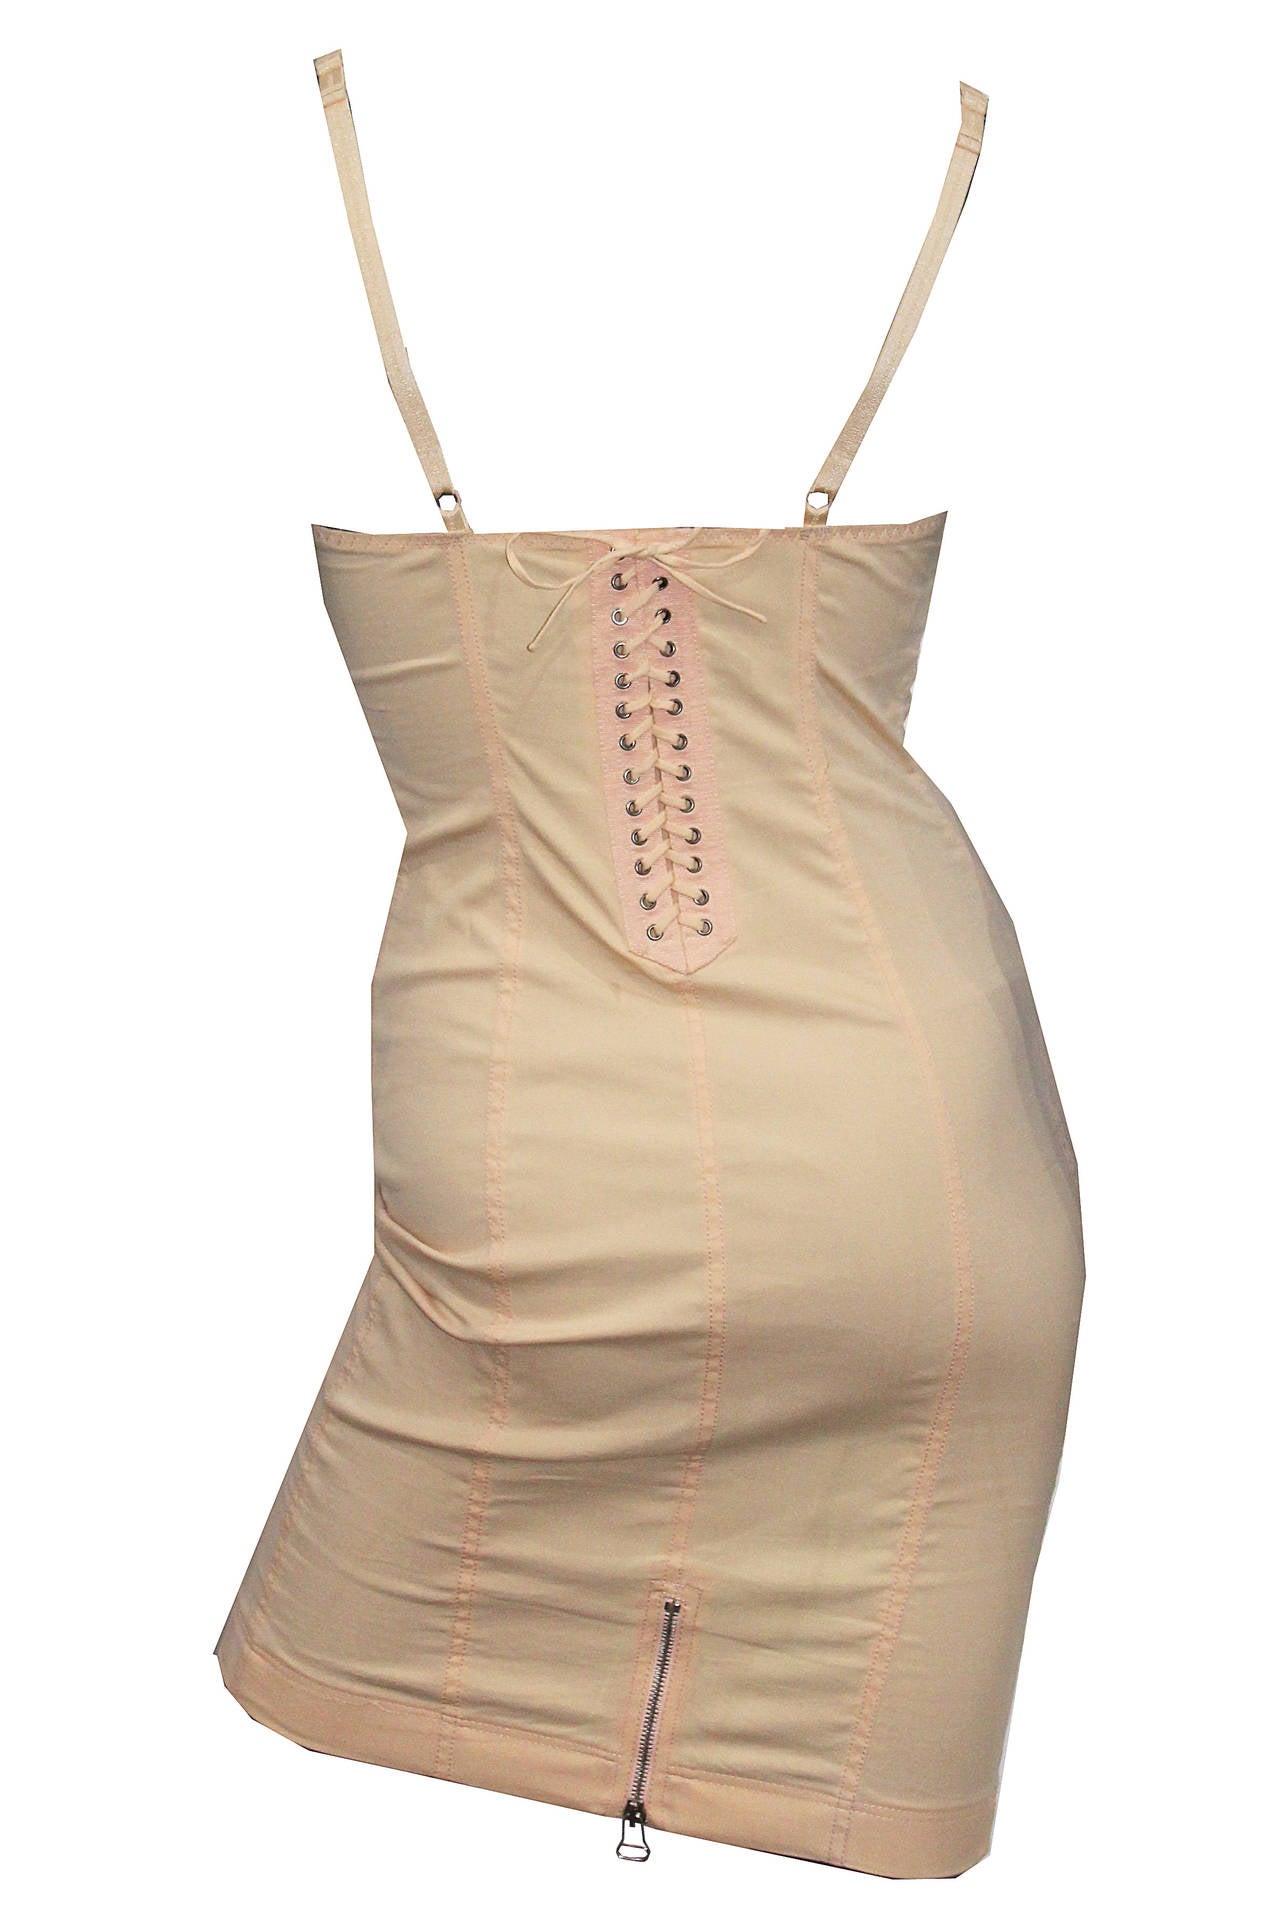 Iconic cone-bra bodycon dress from 1989. The dress is in a nude/peach colour and similar to skin tone. The bra straps are adjustable and features inside pockets to insert pads for the ultimate Gaultier/Madonna look. Lace up back with metal zippers.